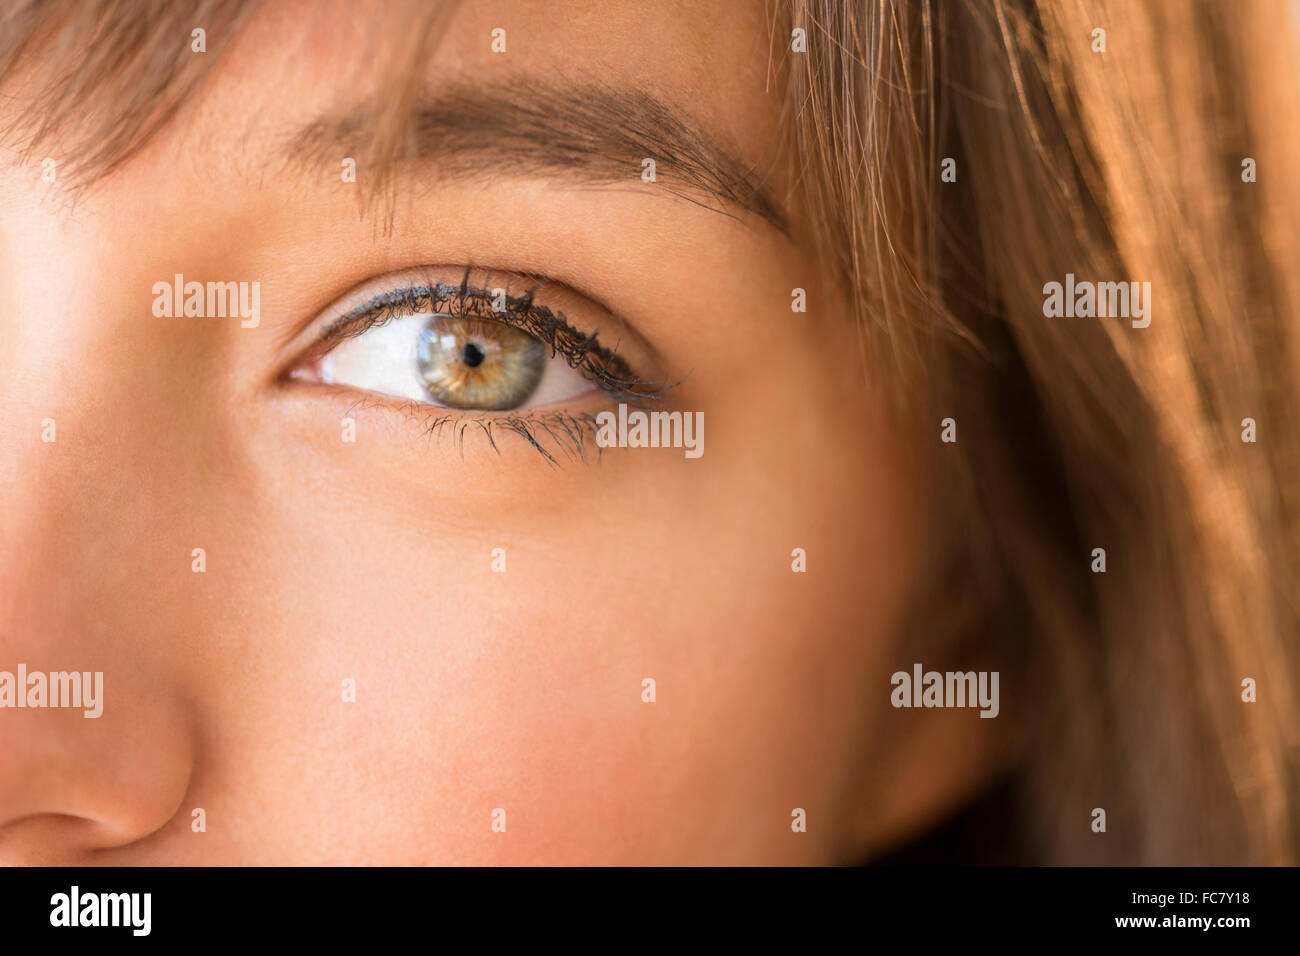 Close up of eye of mixed race woman Stock Photo